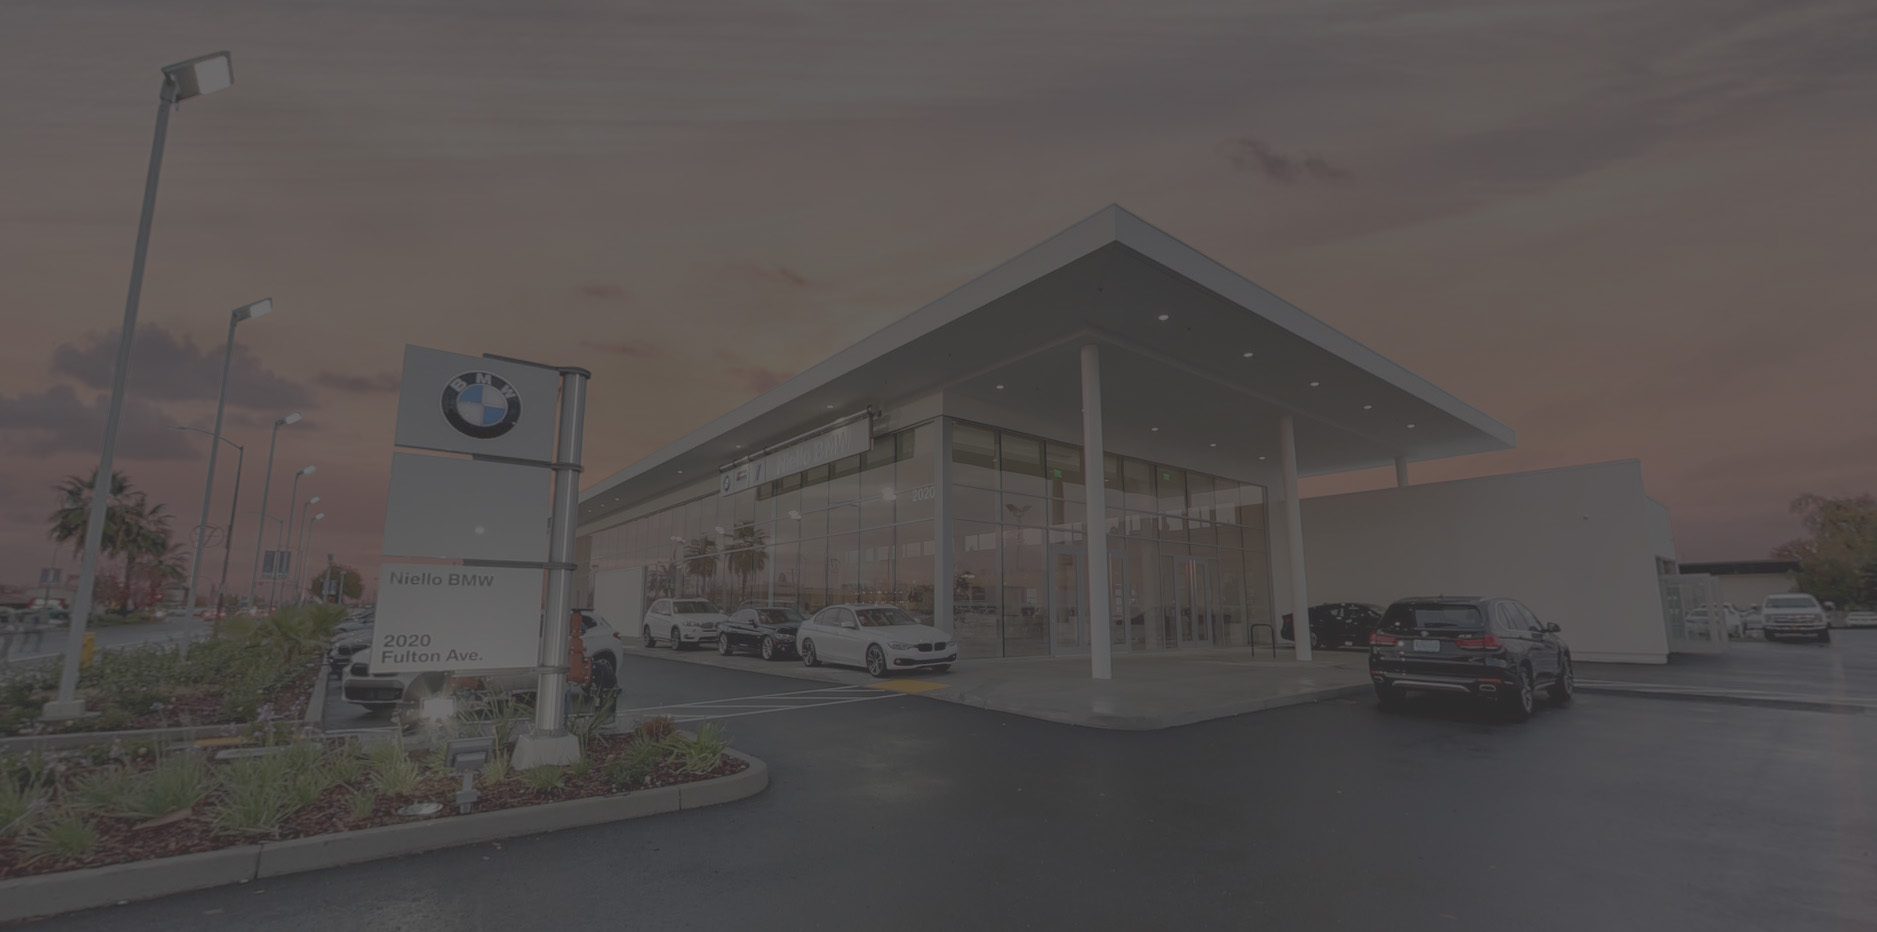  One of the main design goals of the new BMW facility in Sacramento, California was to create a welcoming and comfortable retail environment for today’s BMW customer, and to assist and entice new consumers to the BMW brand of the future. The orientat